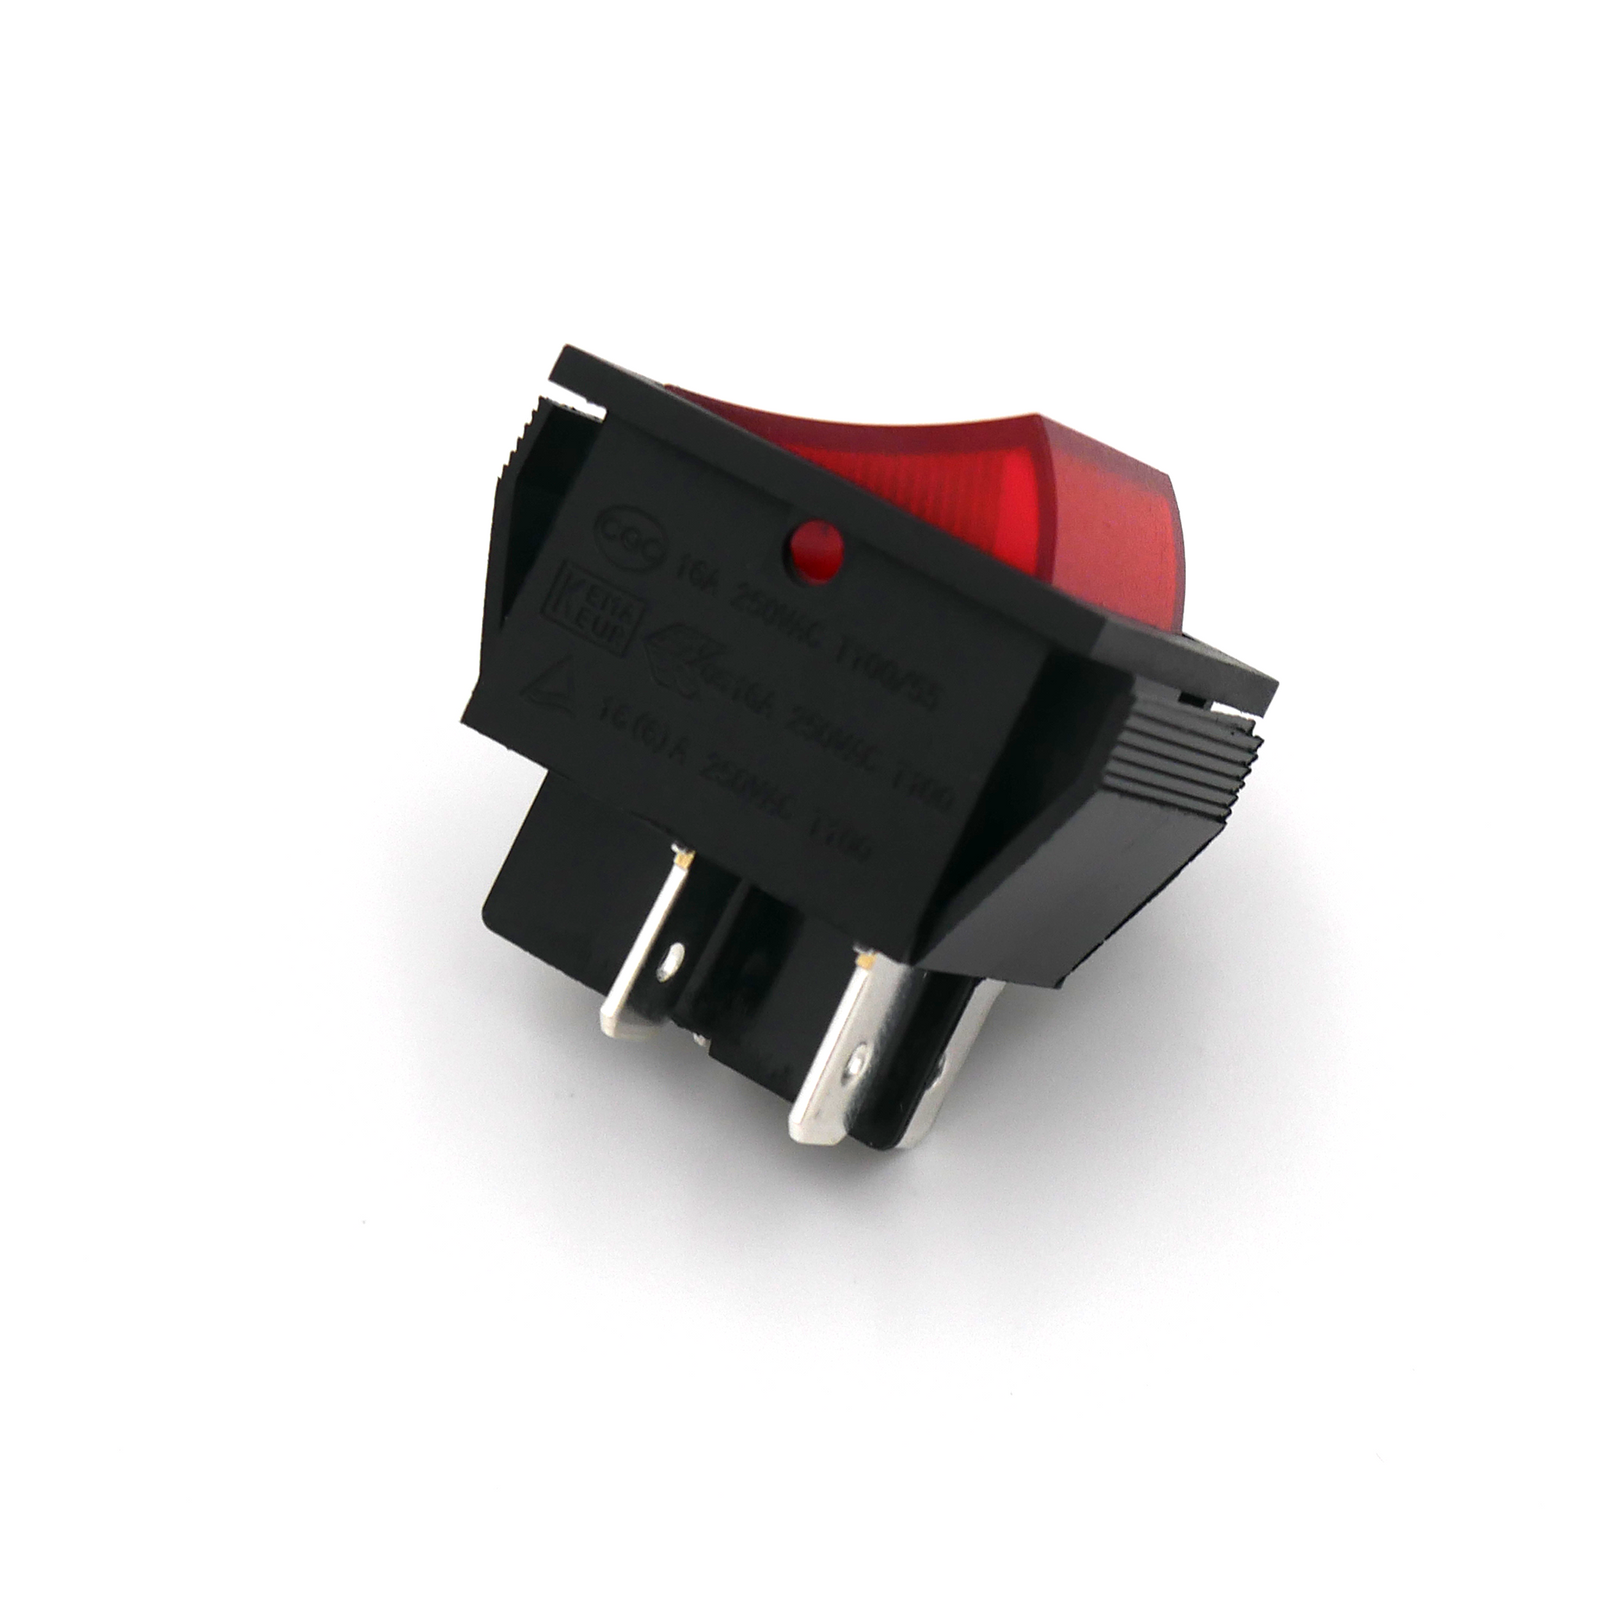 Red rocker switch used for power control on/off 